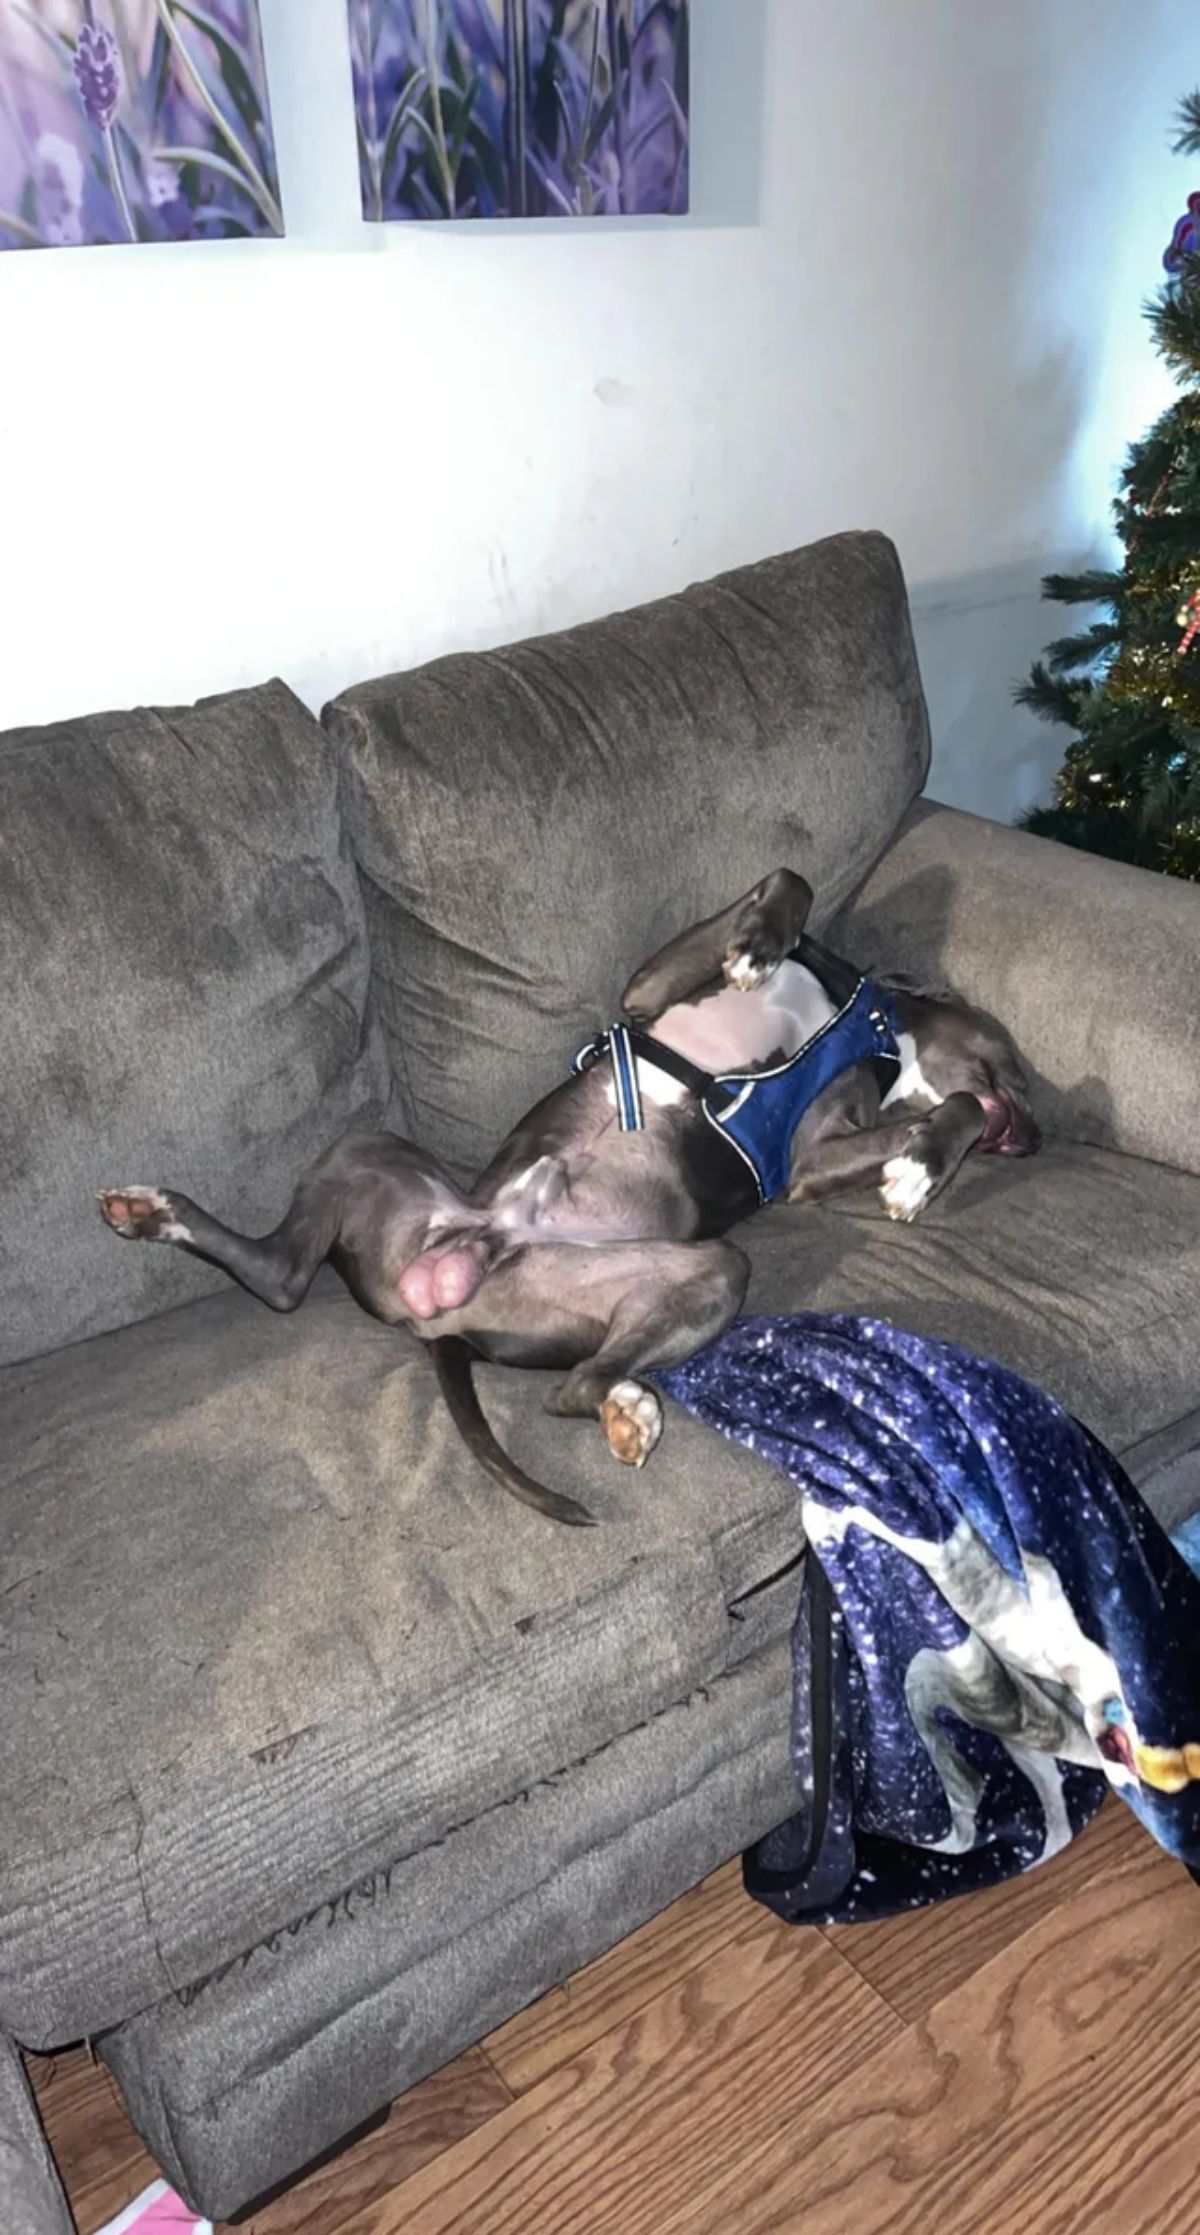 grey and white dog wearing blue harness sleeping belly up on grey sofa